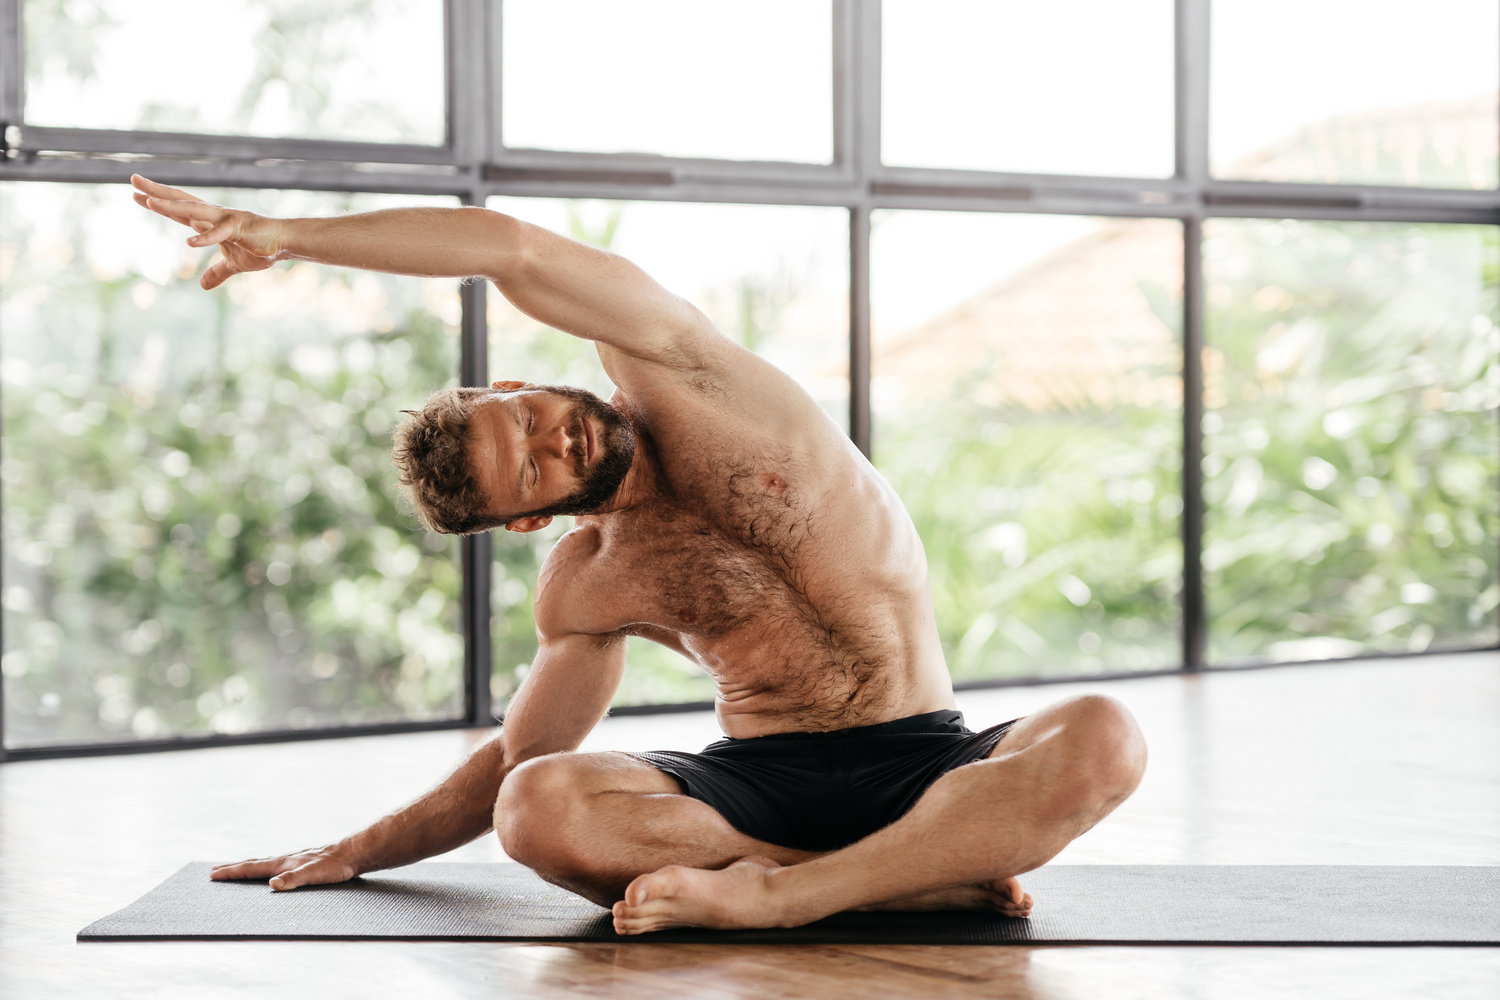 Yoga men workout in studio in front of a window